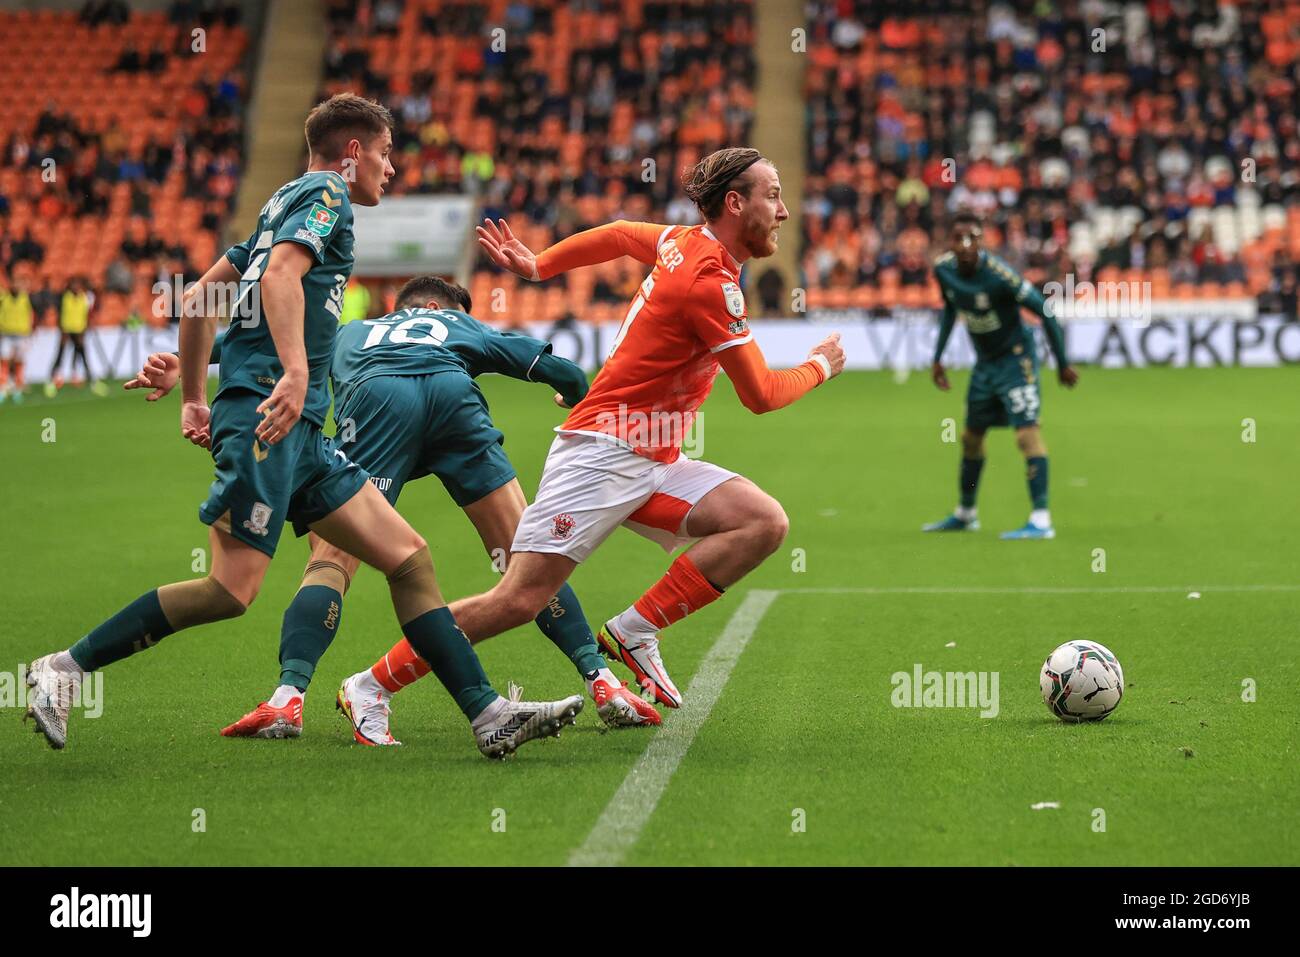 Josh Bowler #11 of Blackpool bursts through Jack Robinson #33 of Middlesbrough and Martin Payero #10 of Middlesbrough to take a shot on goal Stock Photo